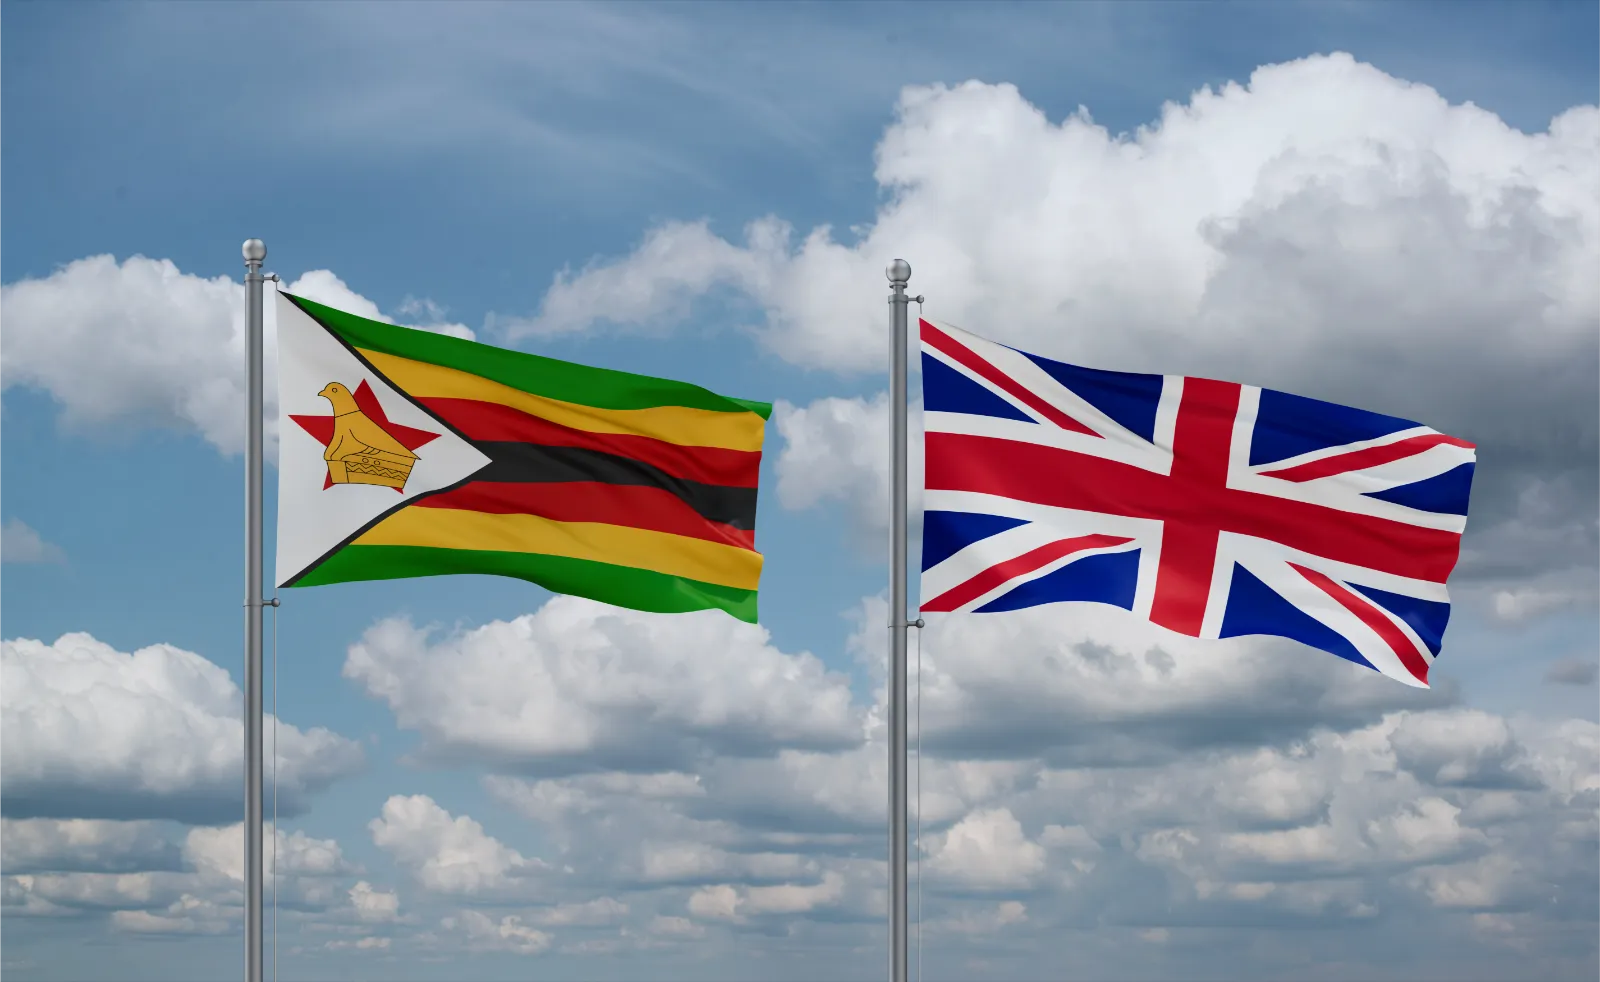 Zimbabwean flag and British flag side by side to represent Zimbabwe notary services in the UK